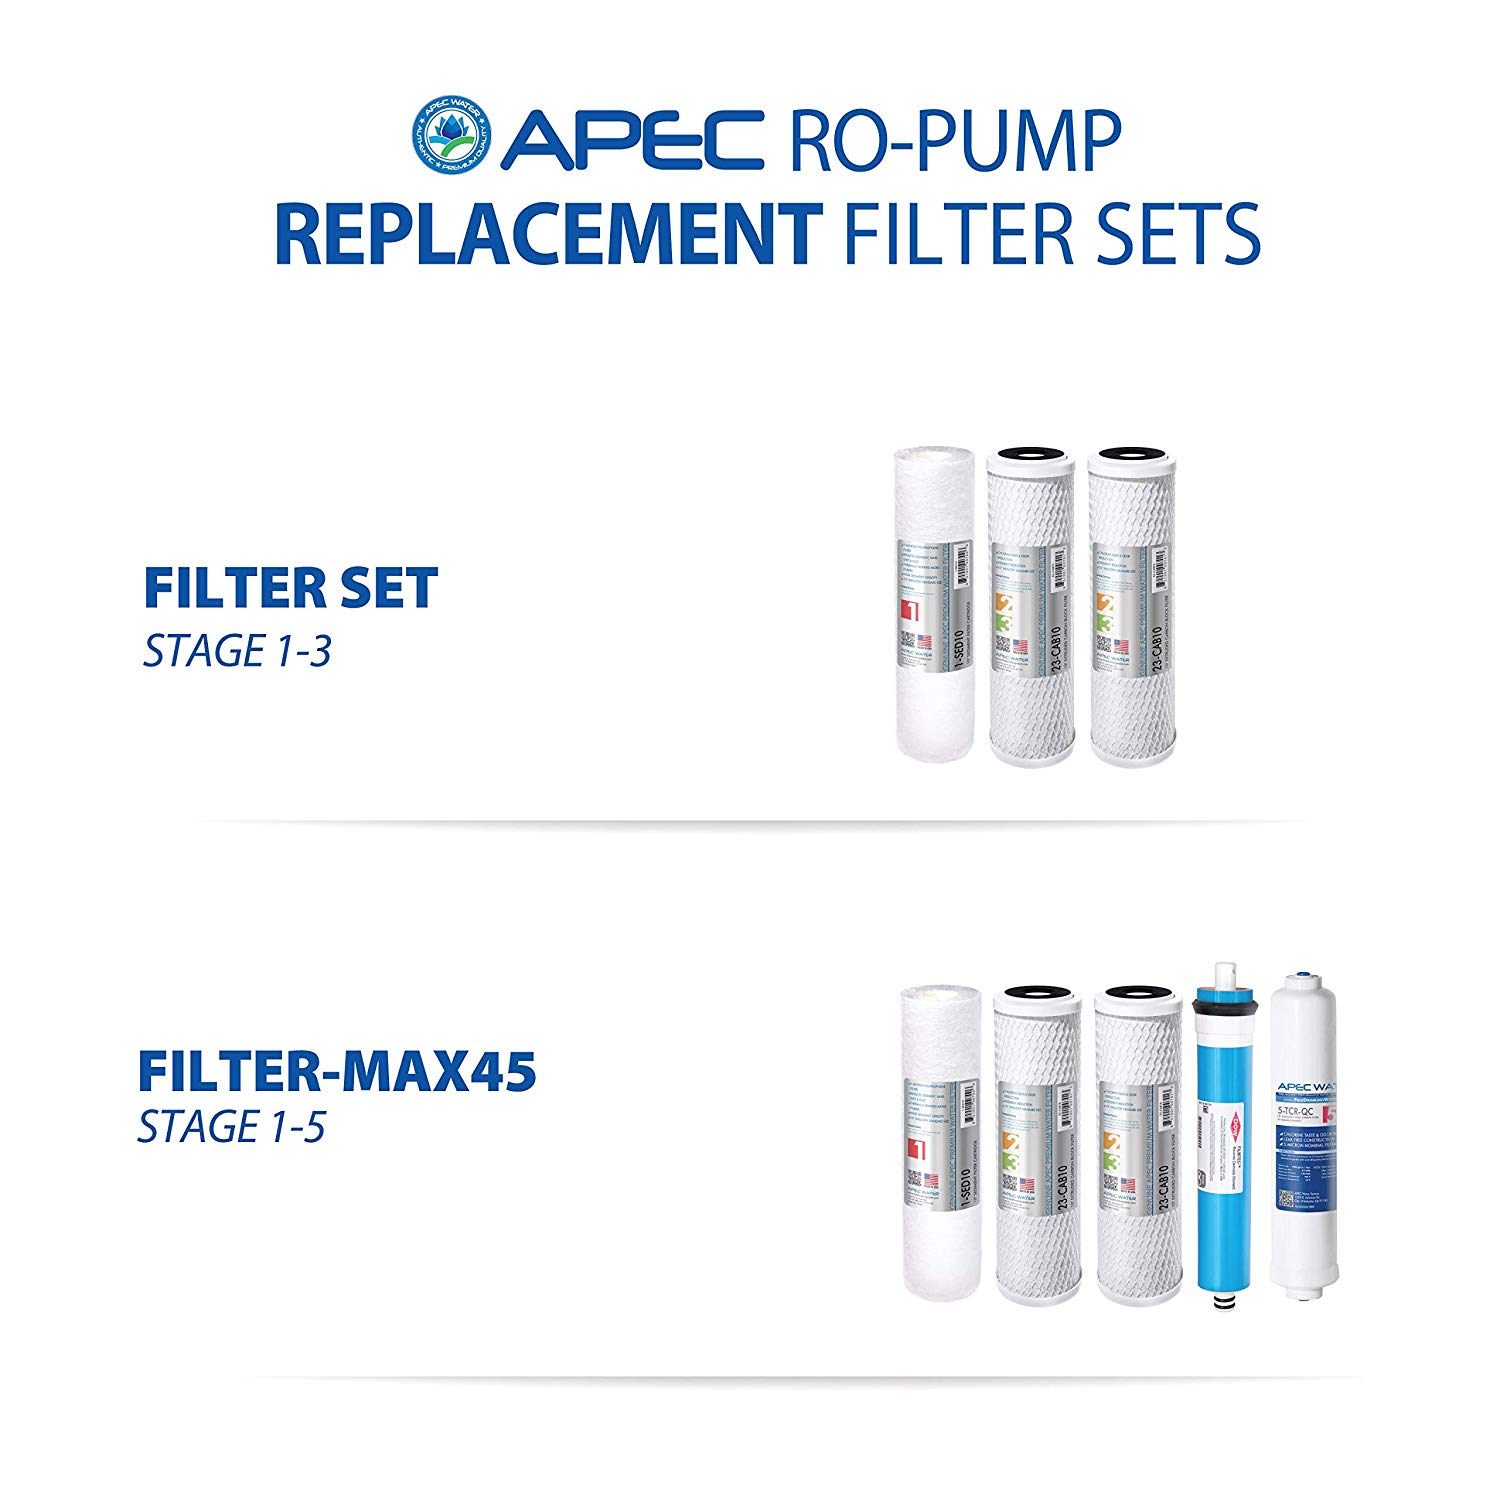 APEC Ultimate Reverse Osmosis Drinking Water Filtration System with Booster Pump for Very Low Pressure Homes (RO-PUMP) - image 4 of 12